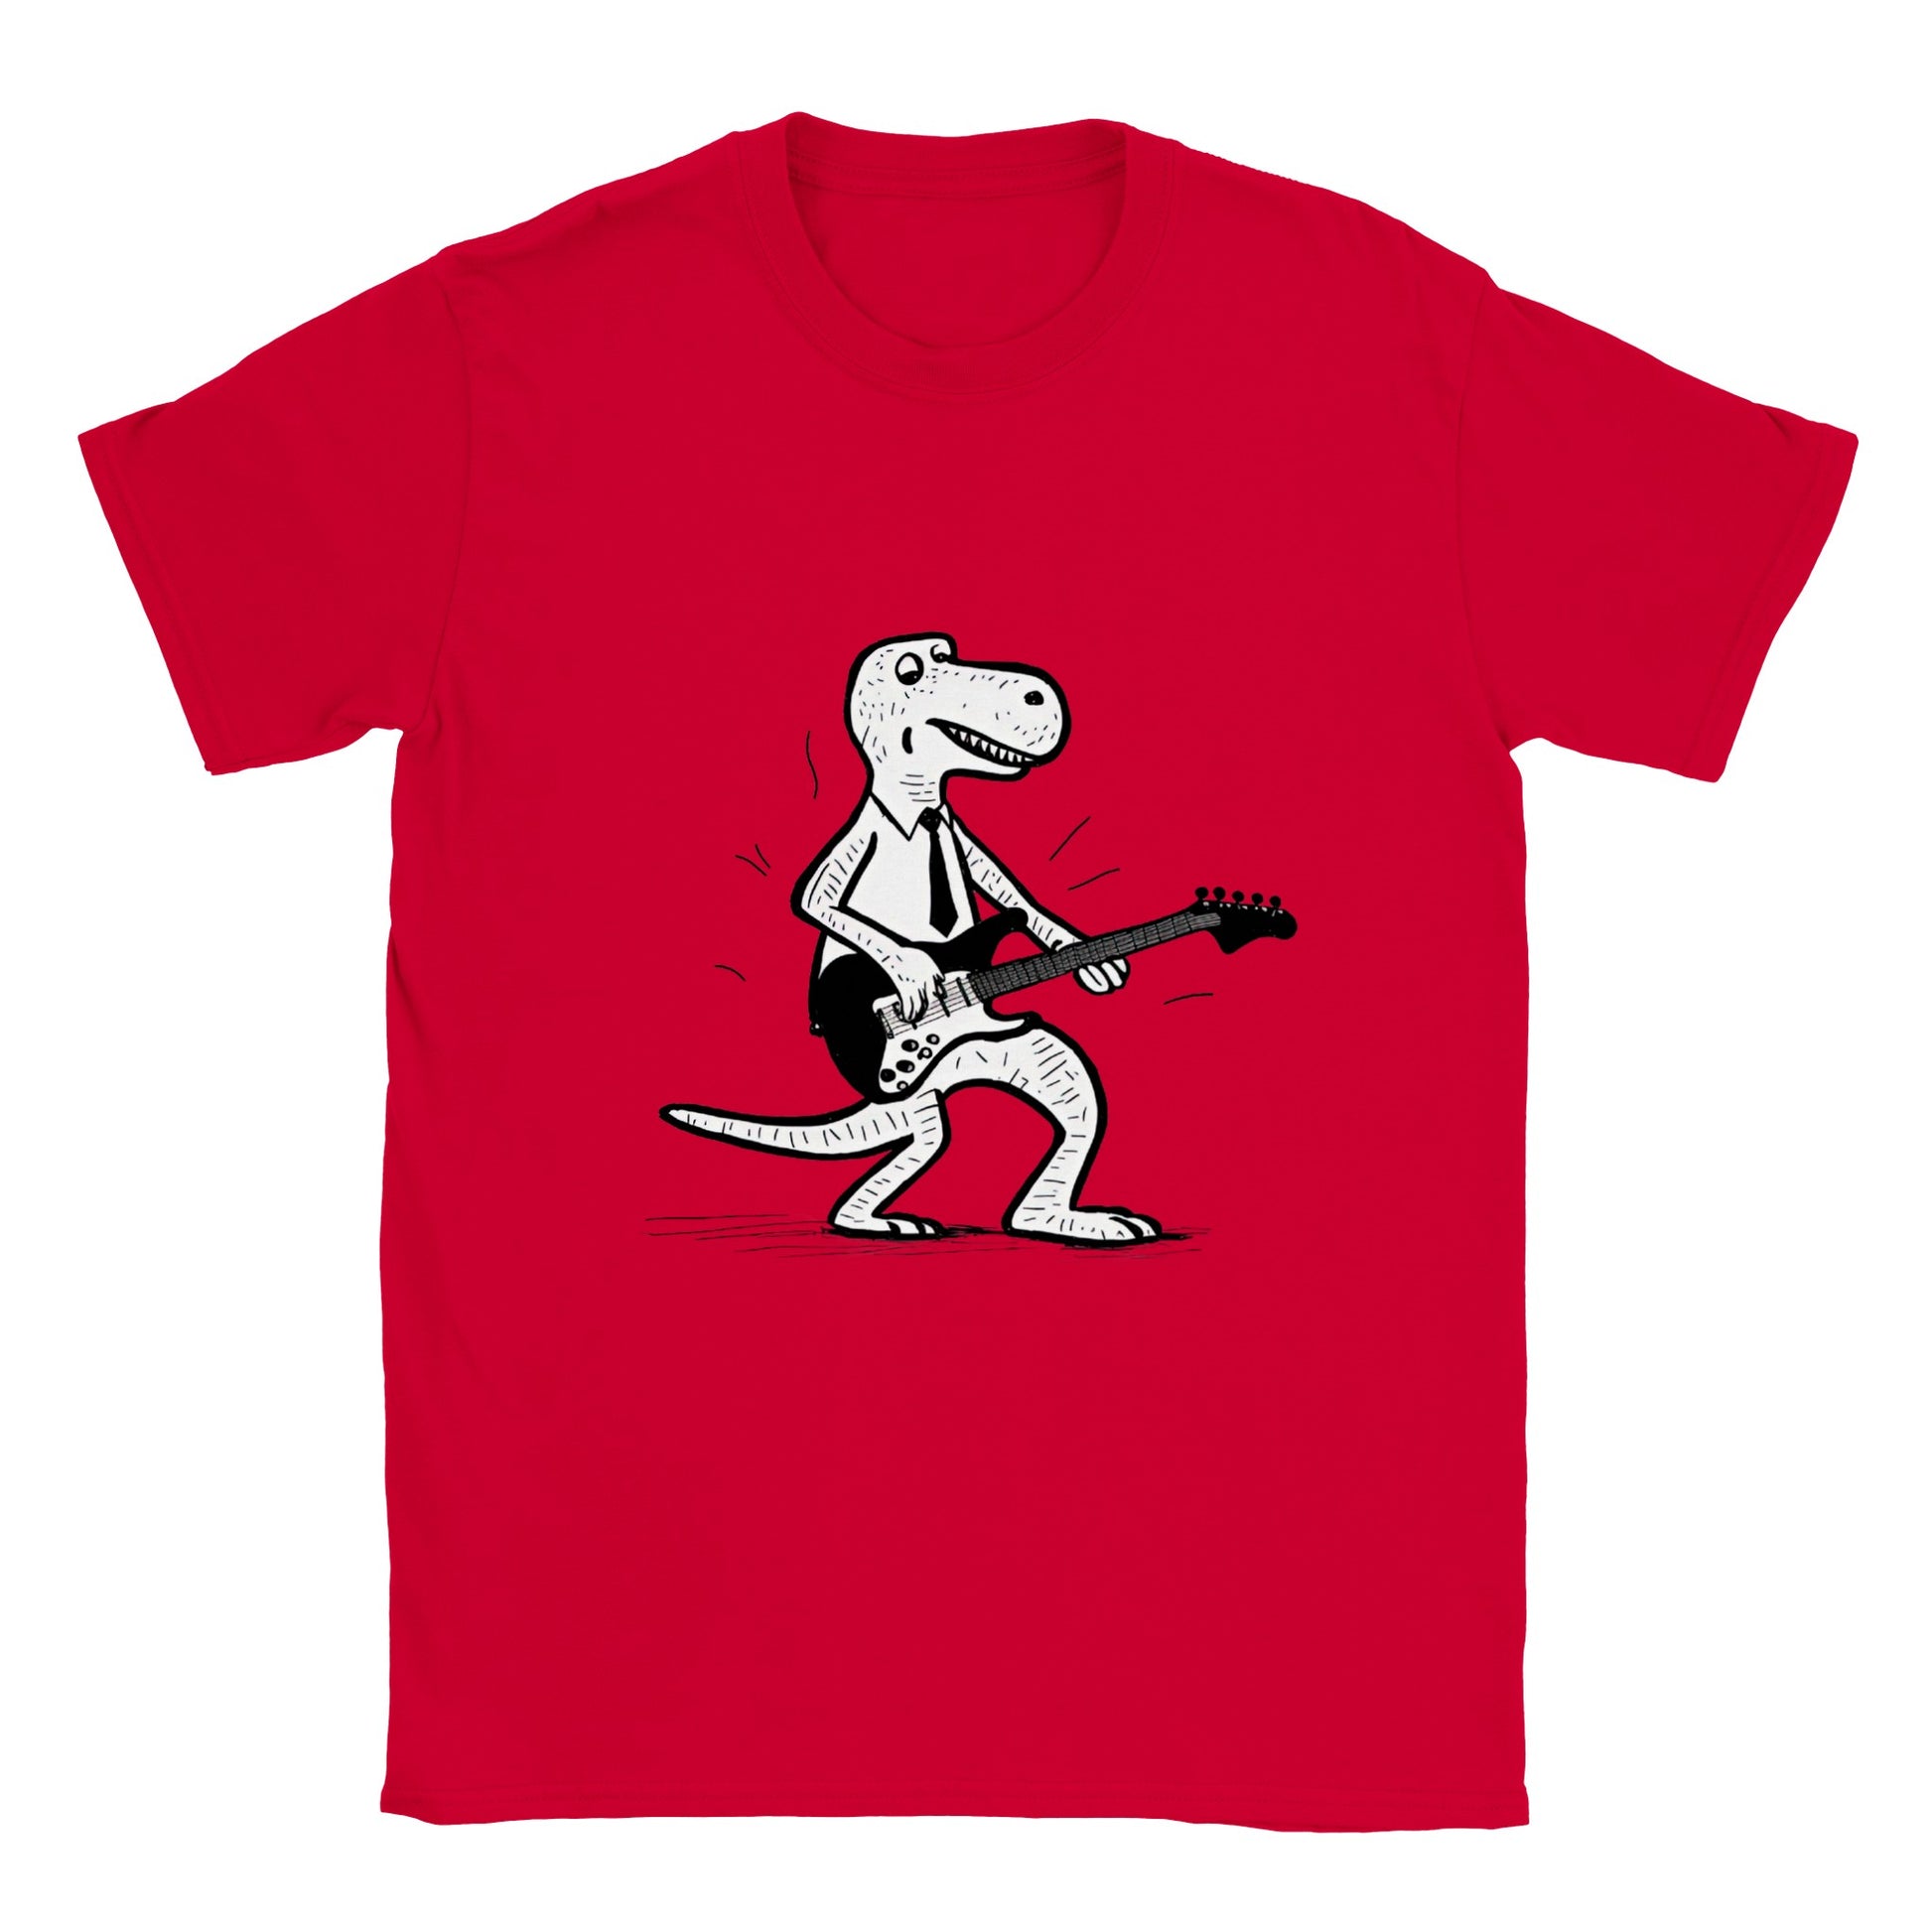 t-rex dinosaur wearing a tie playing the guitar on a red t-shirt